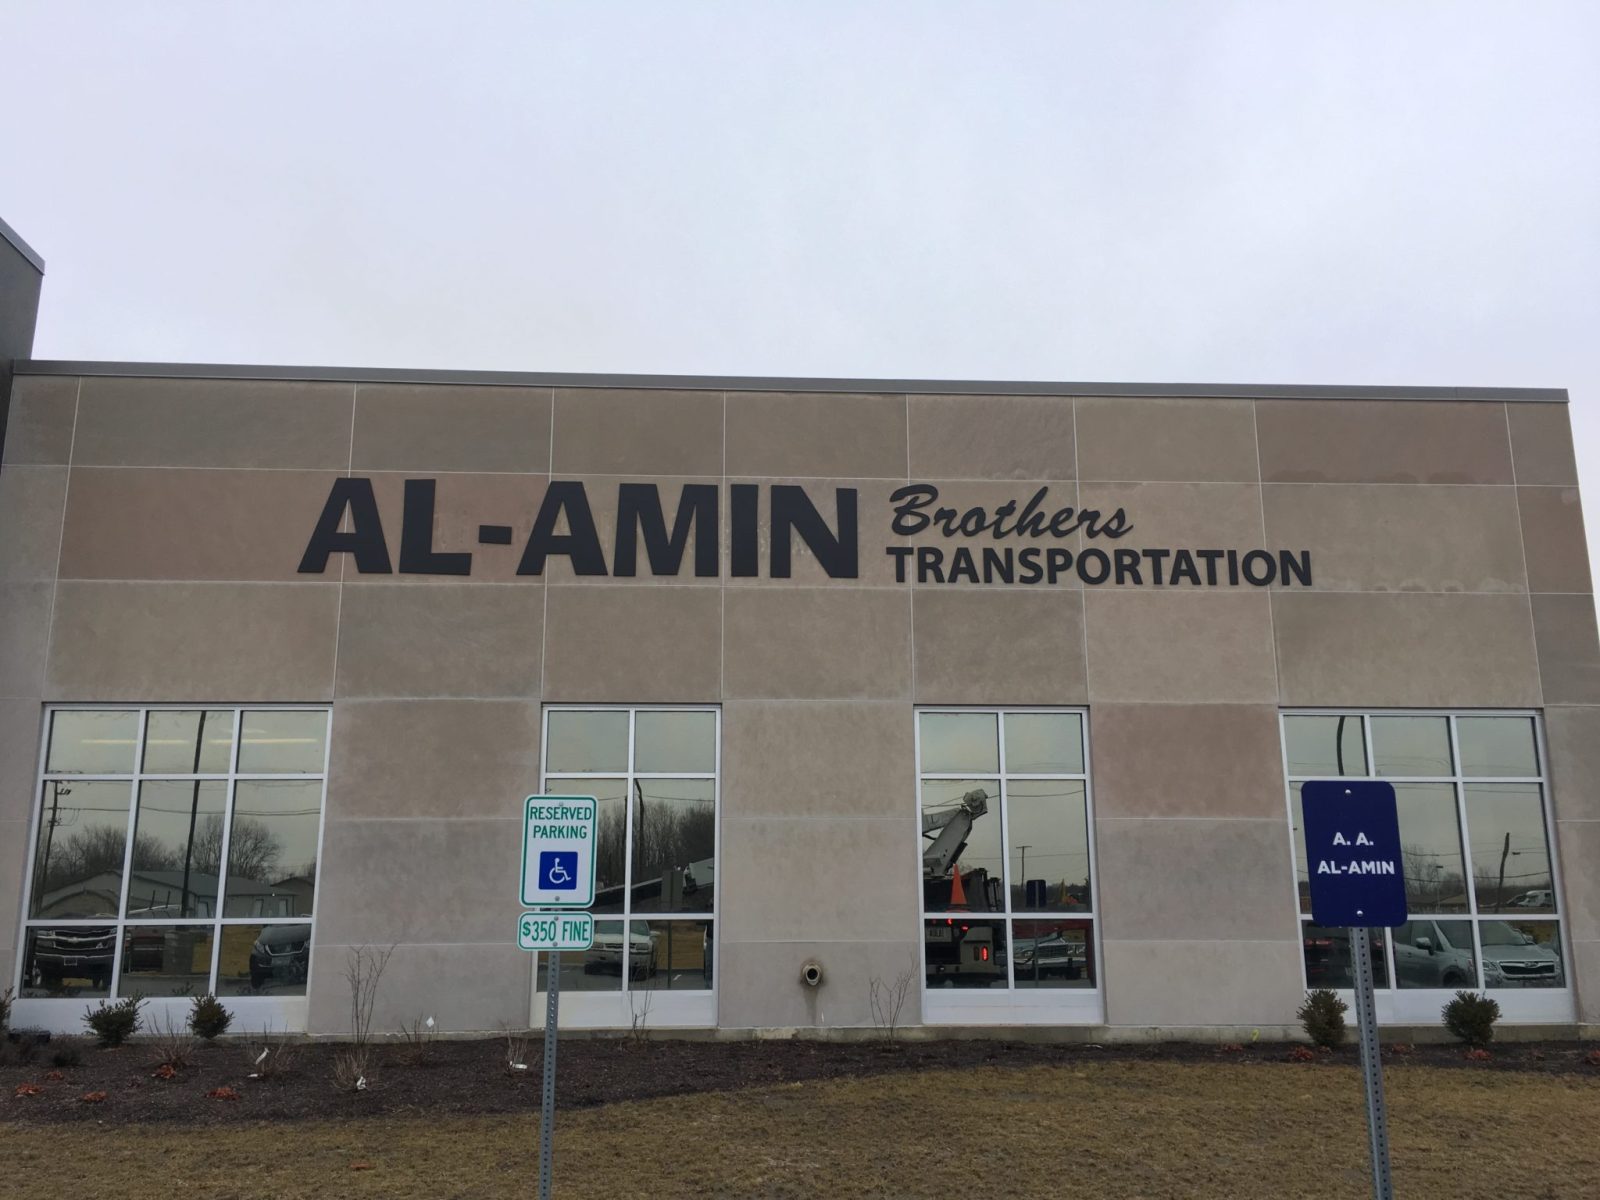 The outside of a building with a big beautiful sign with channel letters that says "Al-Amin Brothers Transportation", representing how one can benefit from calling a sign installation company in Chicago.